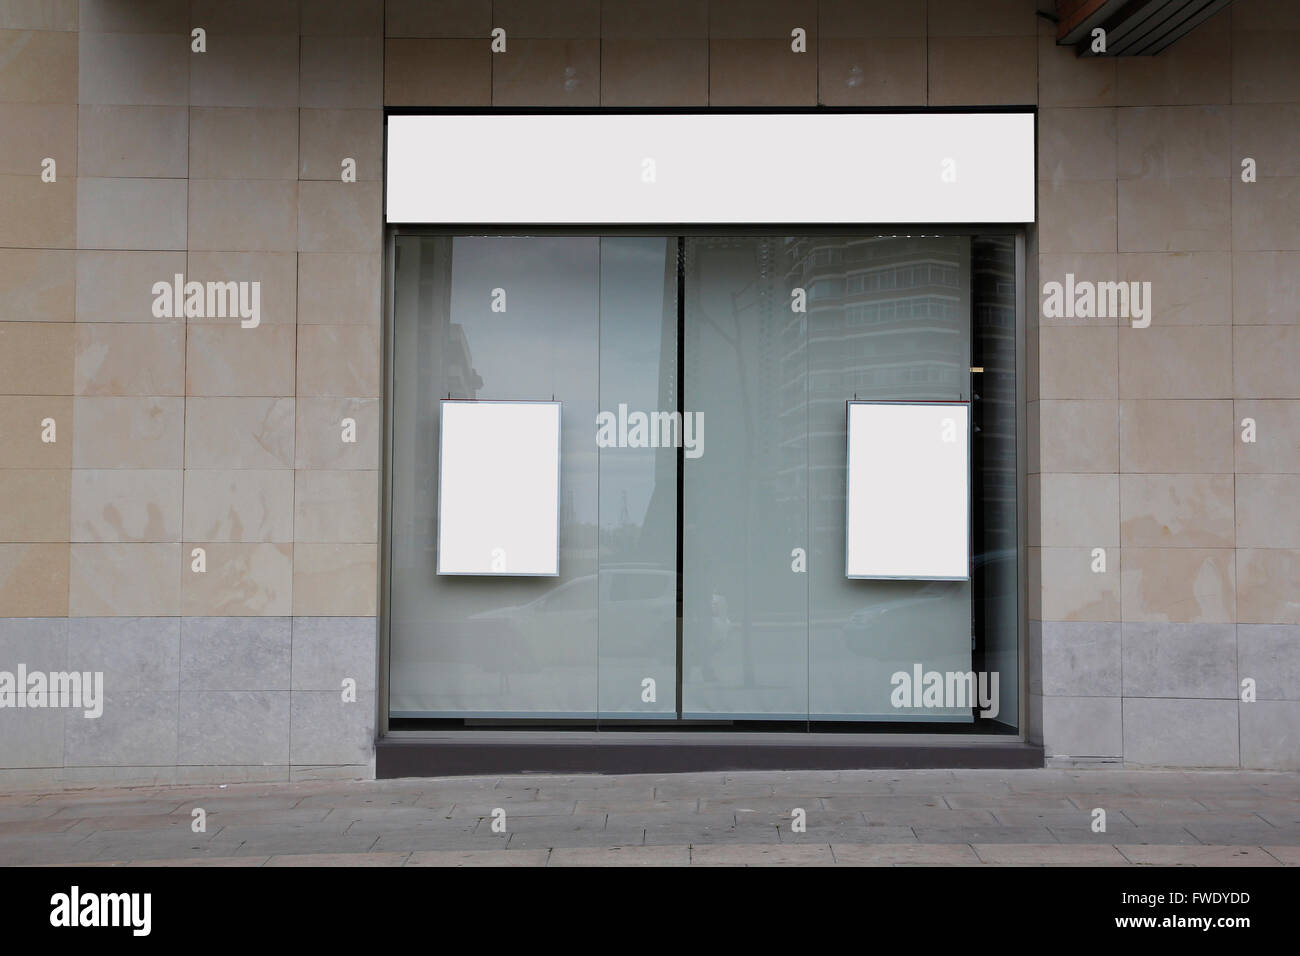 Blank showcase in a store, for free promo Stock Photo